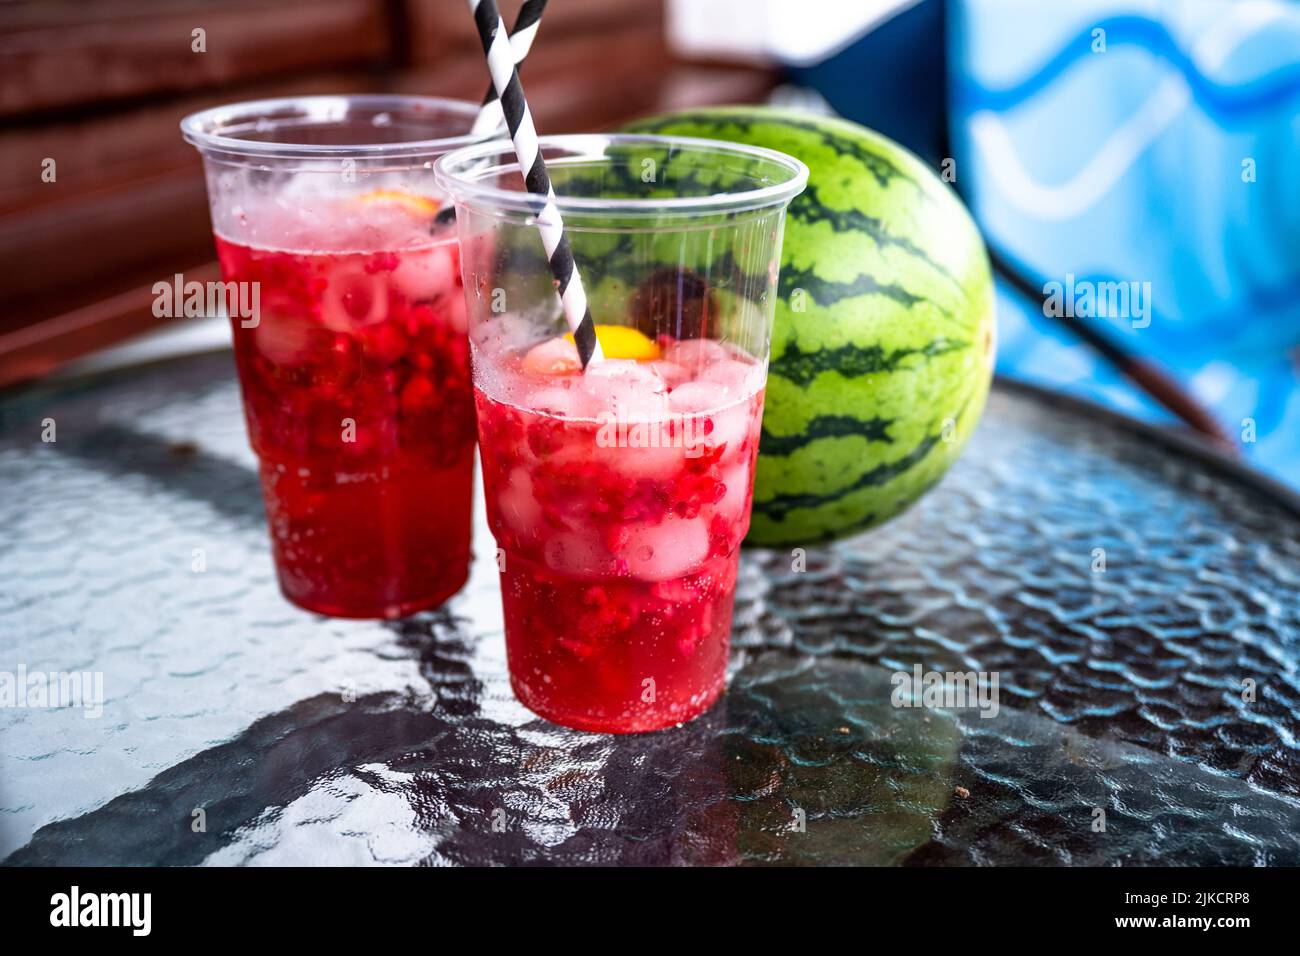 https://c8.alamy.com/comp/2JKCRP8/two-plastic-cup-with-red-dewy-cold-fruit-homemade-lemonade-with-paper-straw-whole-watermelone-on-glass-table-blue-and-brown-background-2JKCRP8.jpg